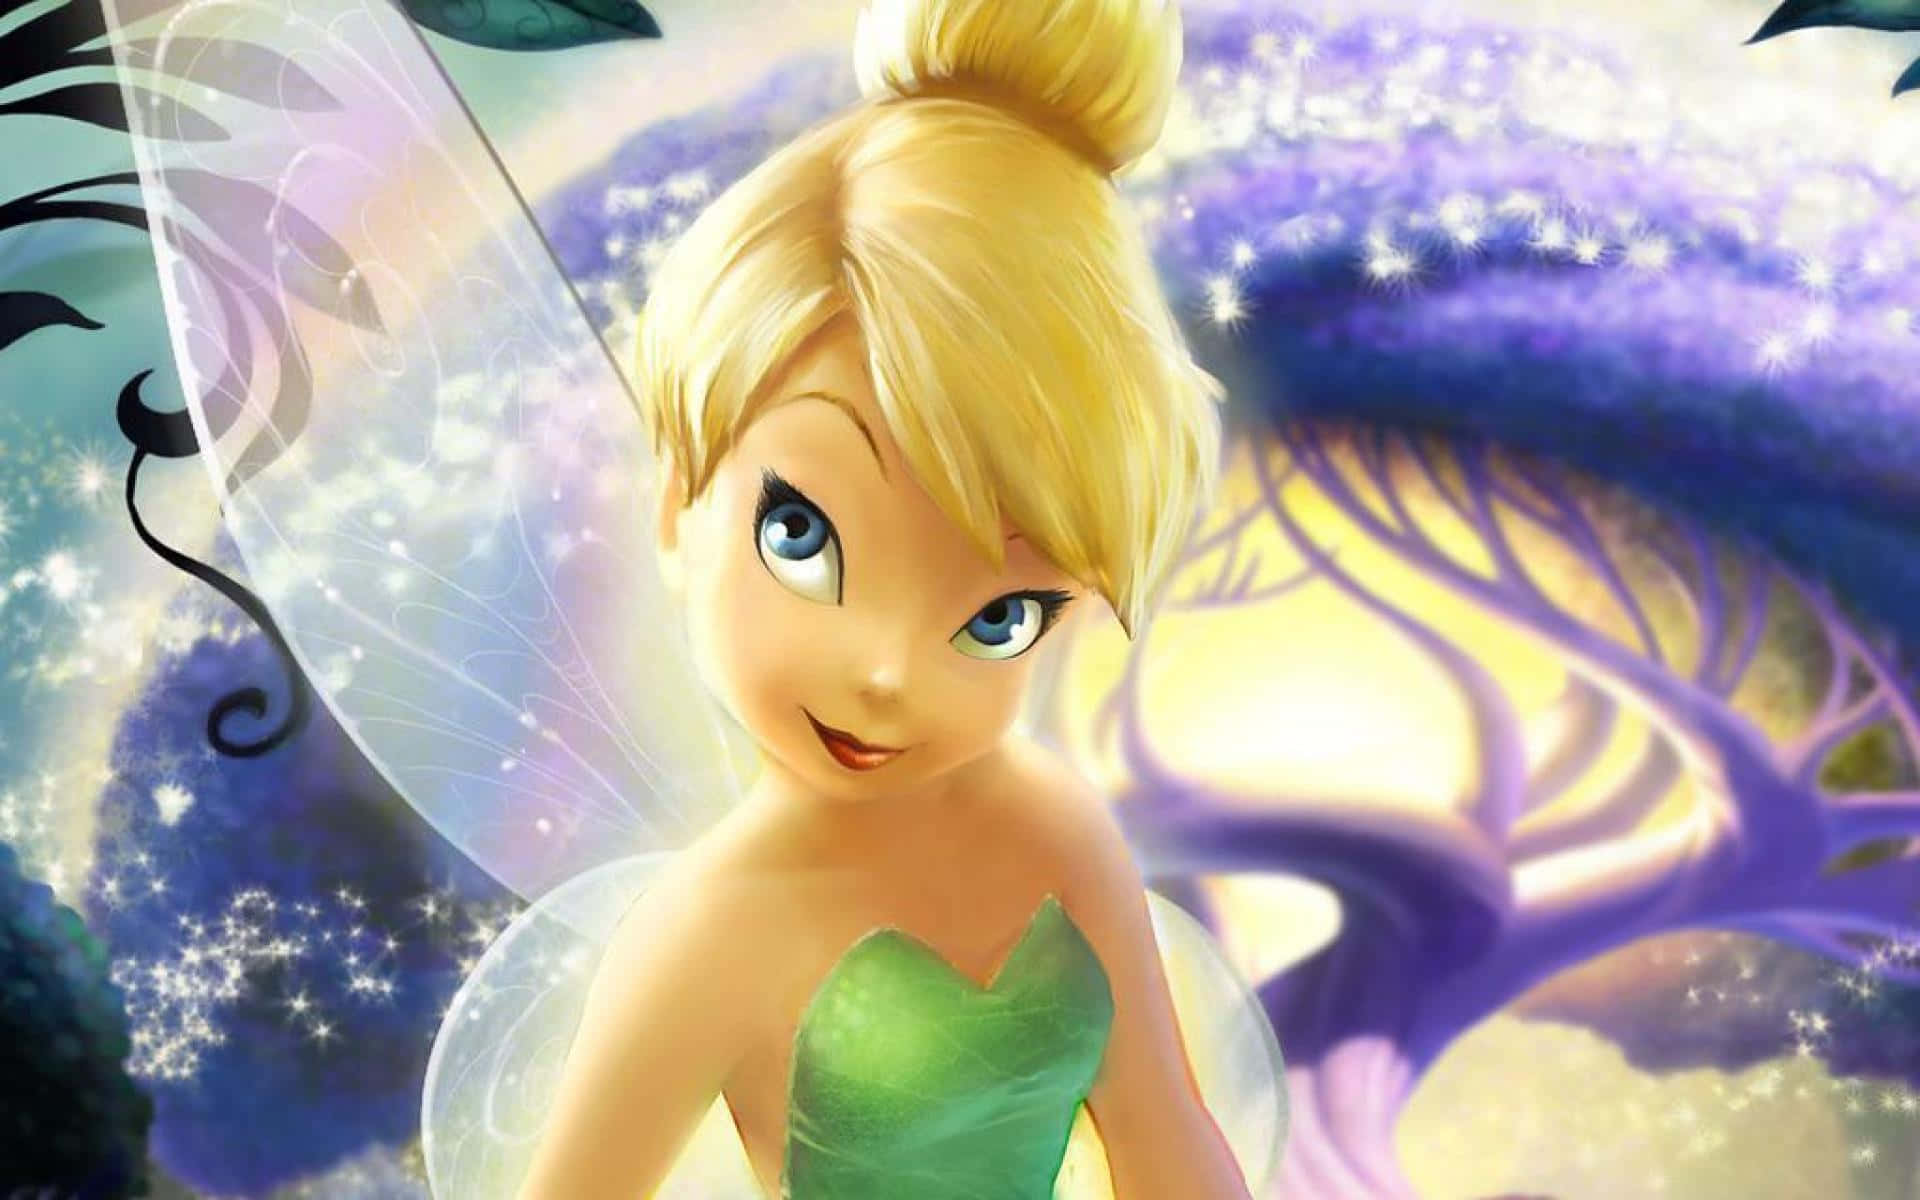 Tinkerbell smiles while sprinkling fairy dust over the meadow.